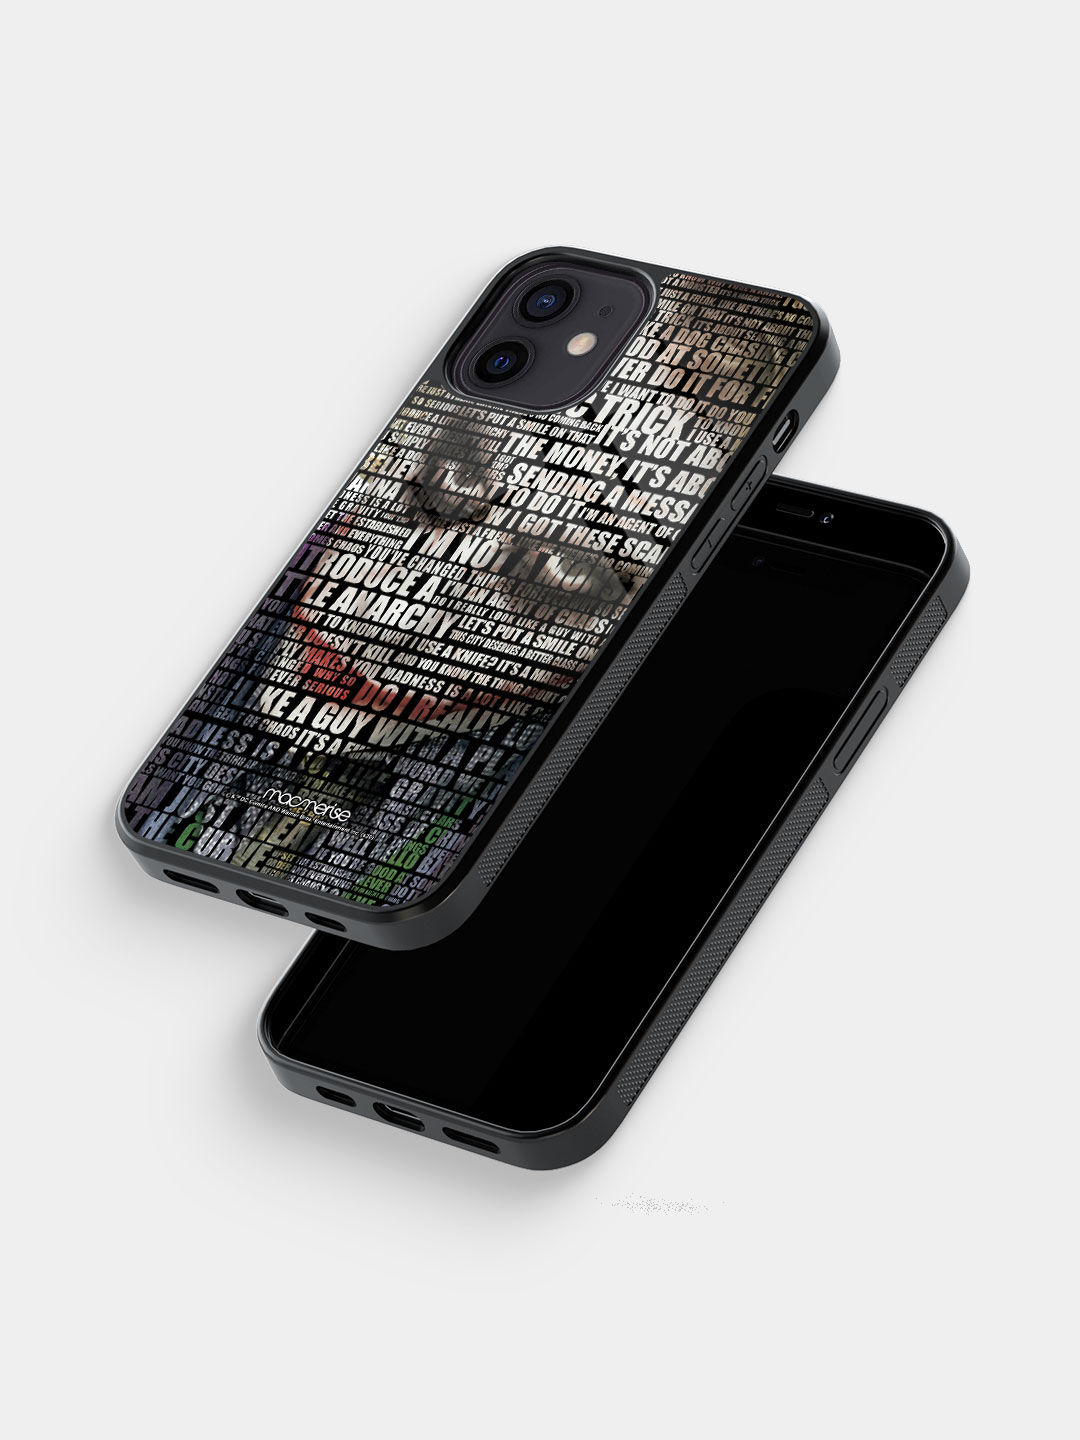 Joker Quotes - Glass Case For iPhone 12 Mini